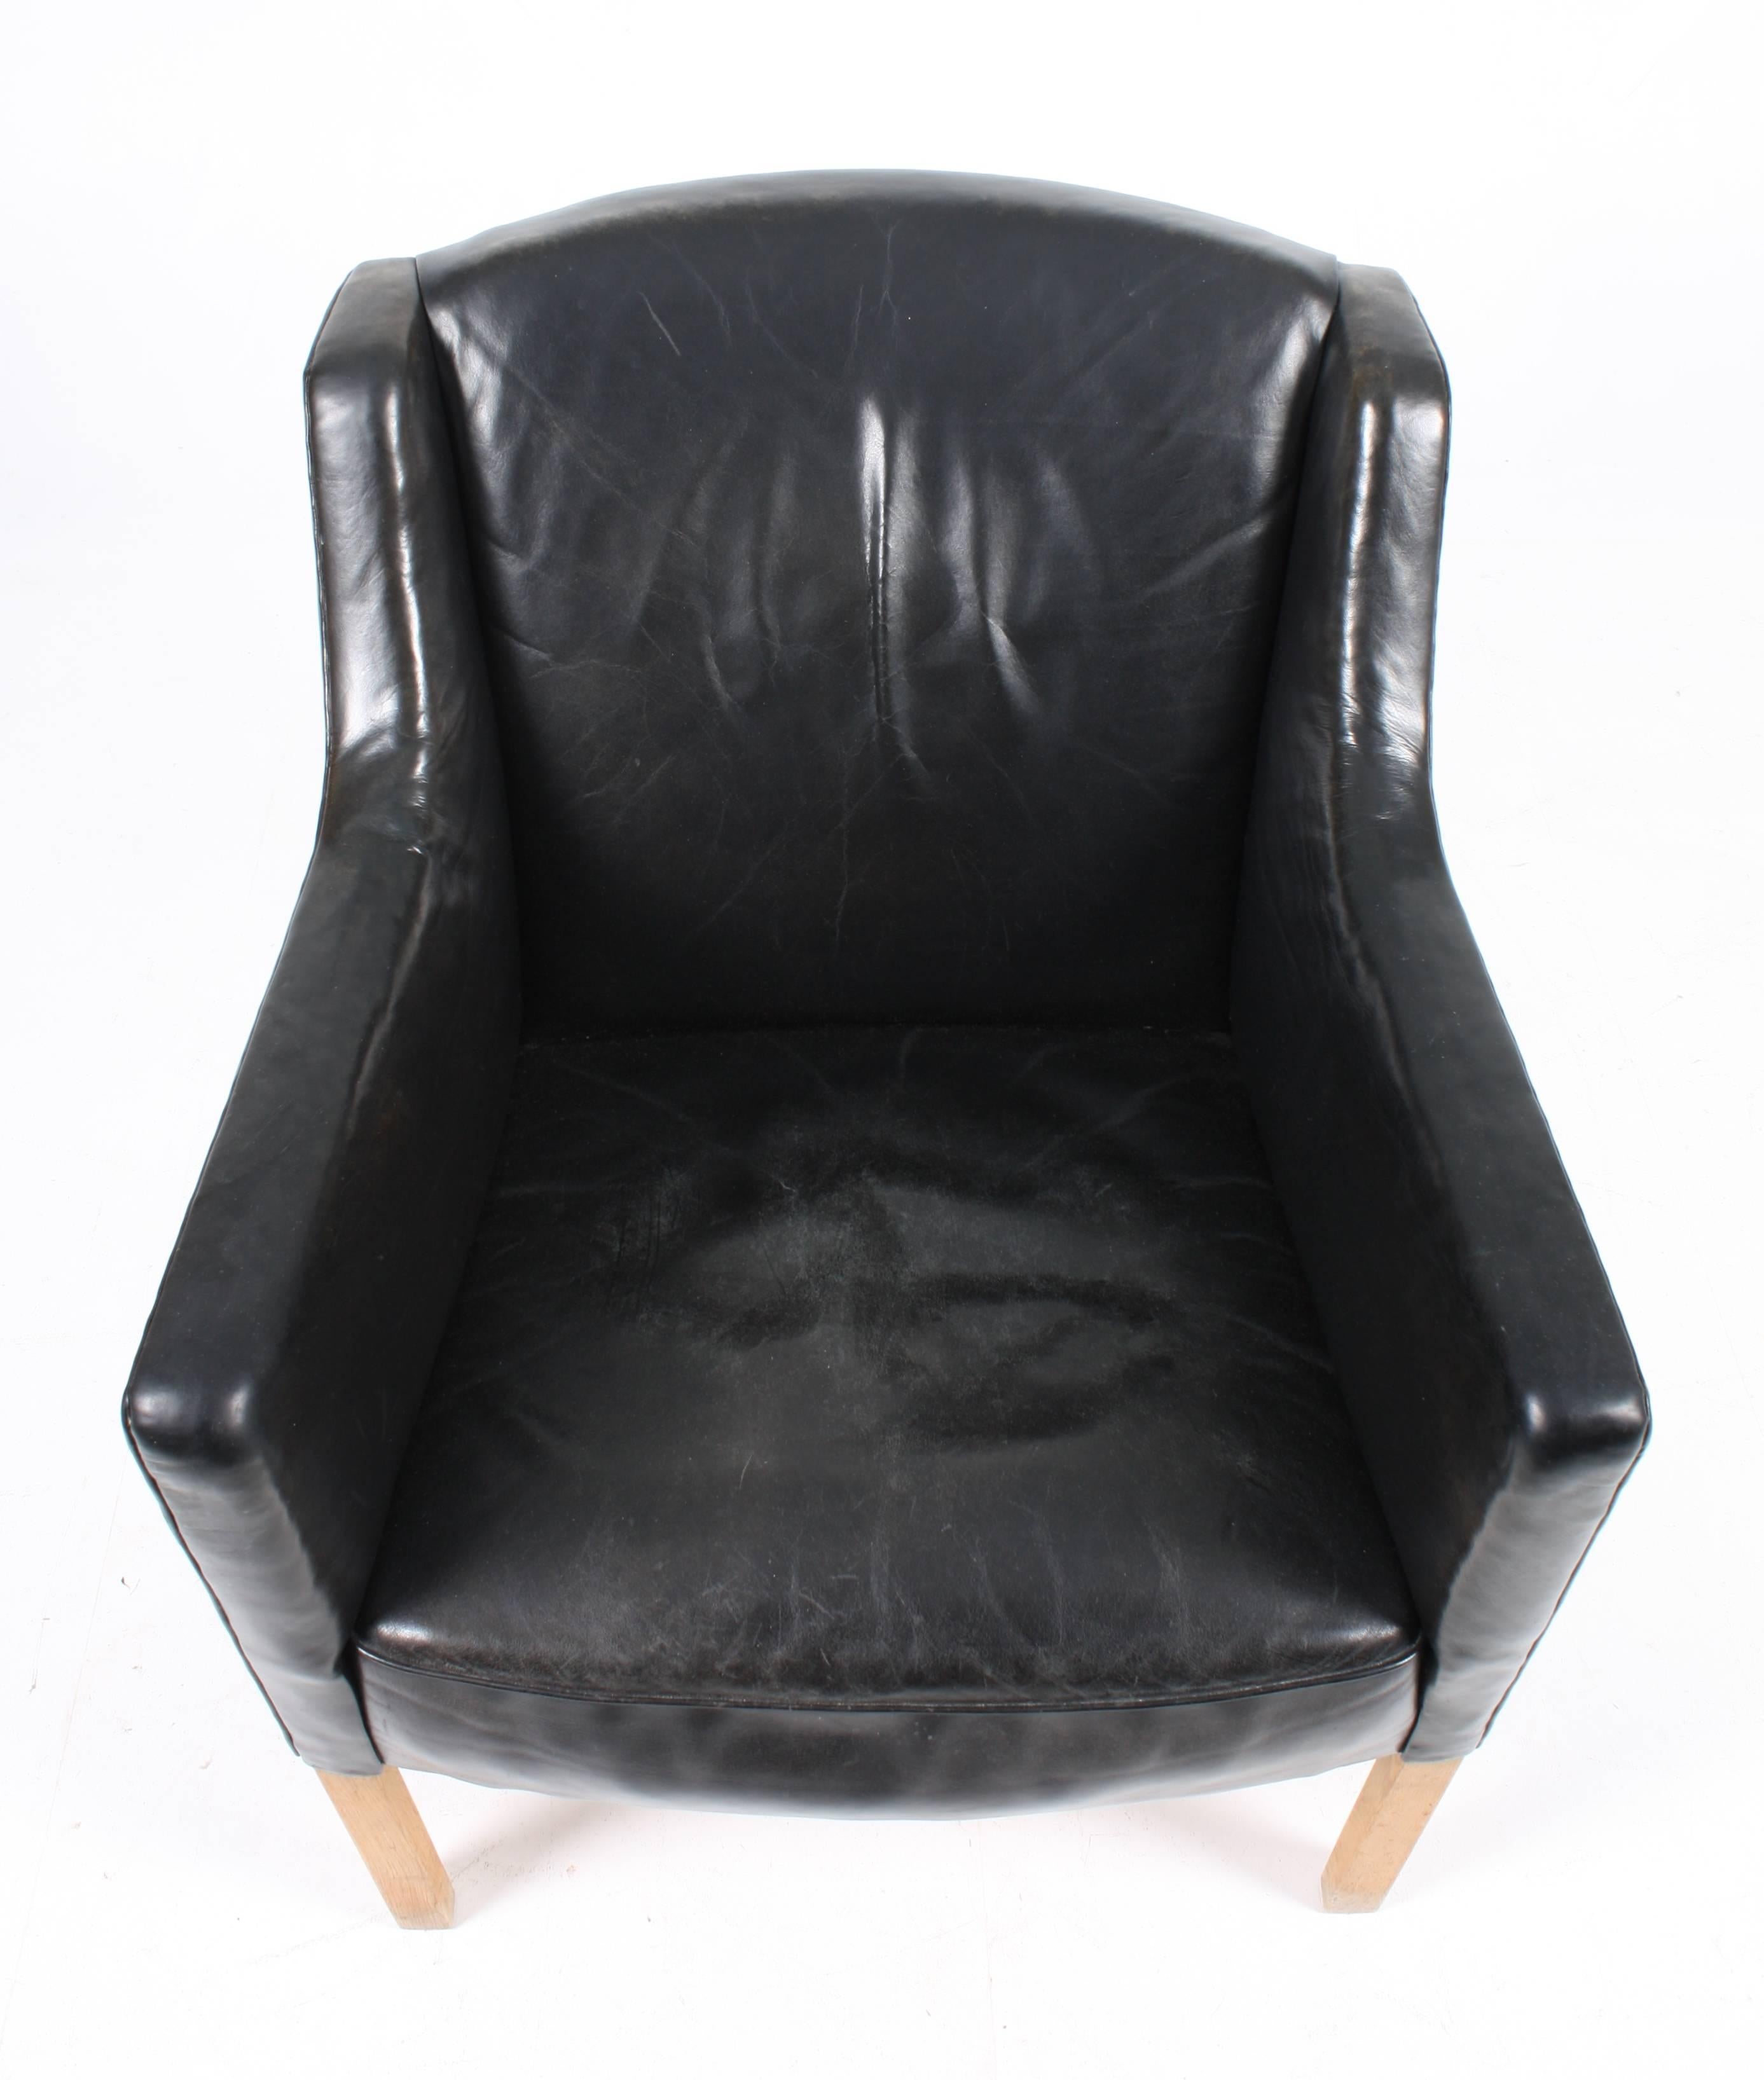 Classic lounge chair in patinated leather designed by Ole Wanschar M.A.A. for A.J. Iversen Cabinetmakers in 1946. Made in Denmark. Great original condition.